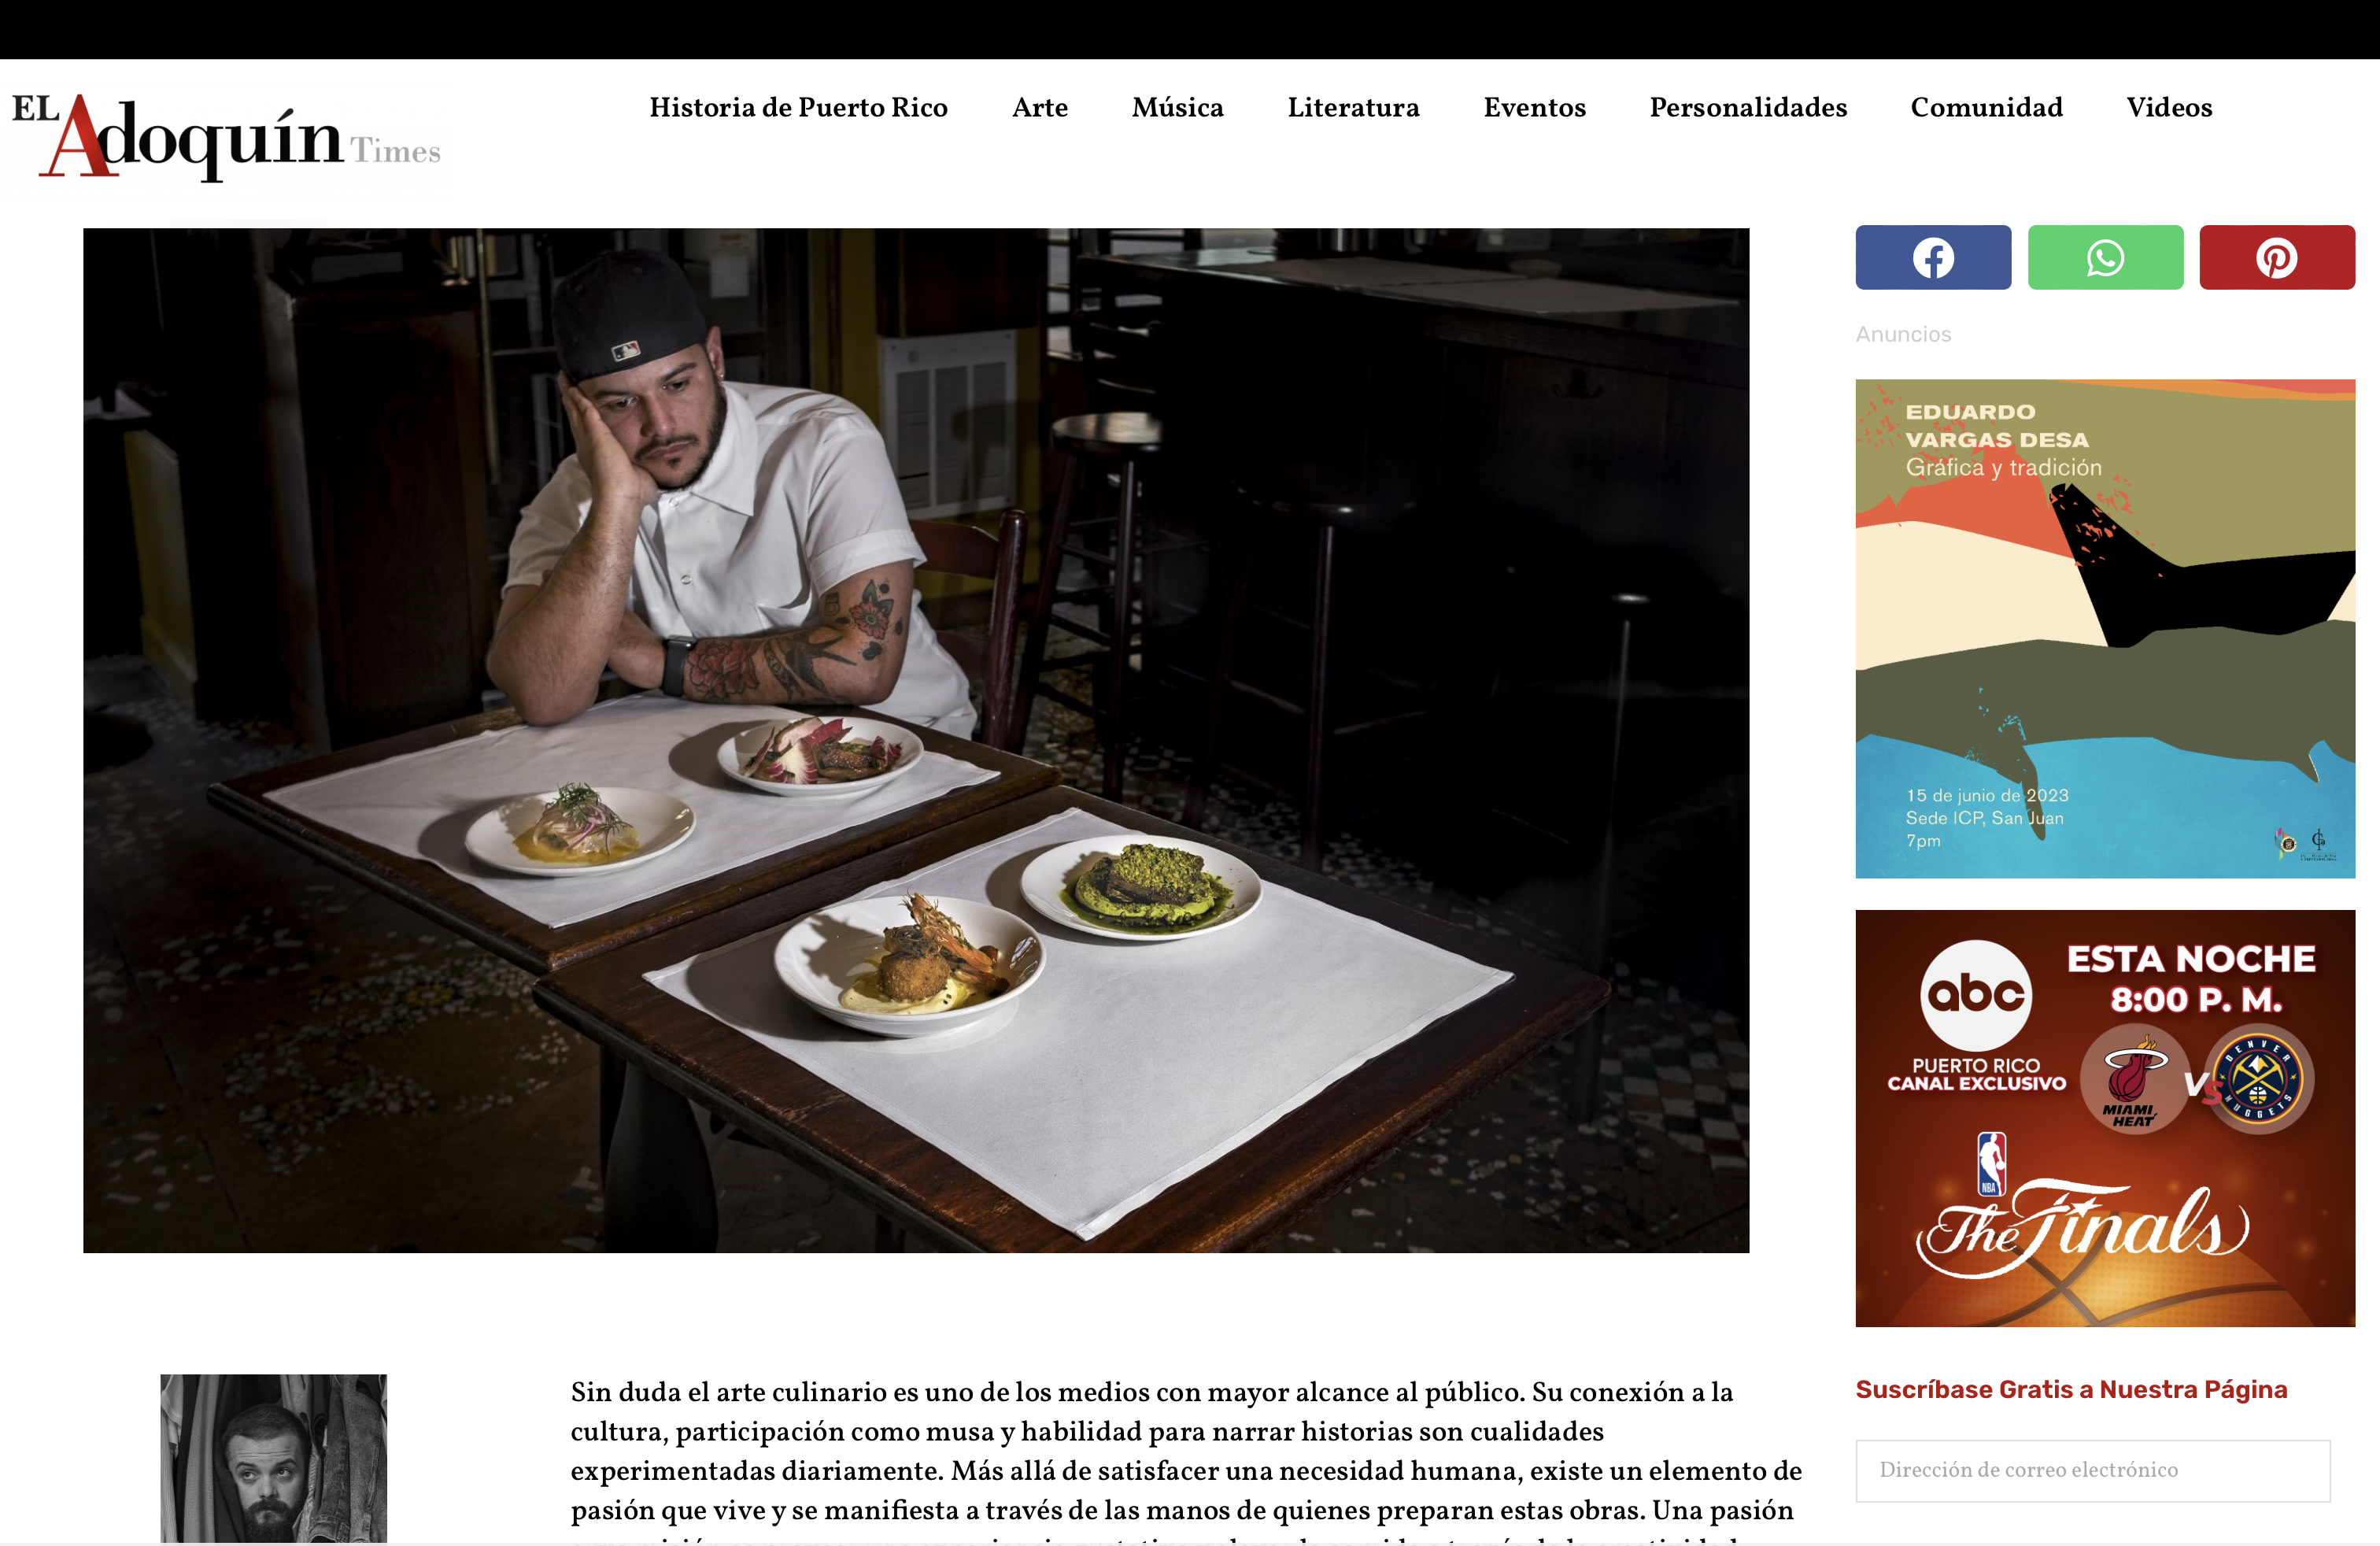 Tearsheets - El Adoquín Times - Interview with Michelin Star chef Jonathan Meléndez